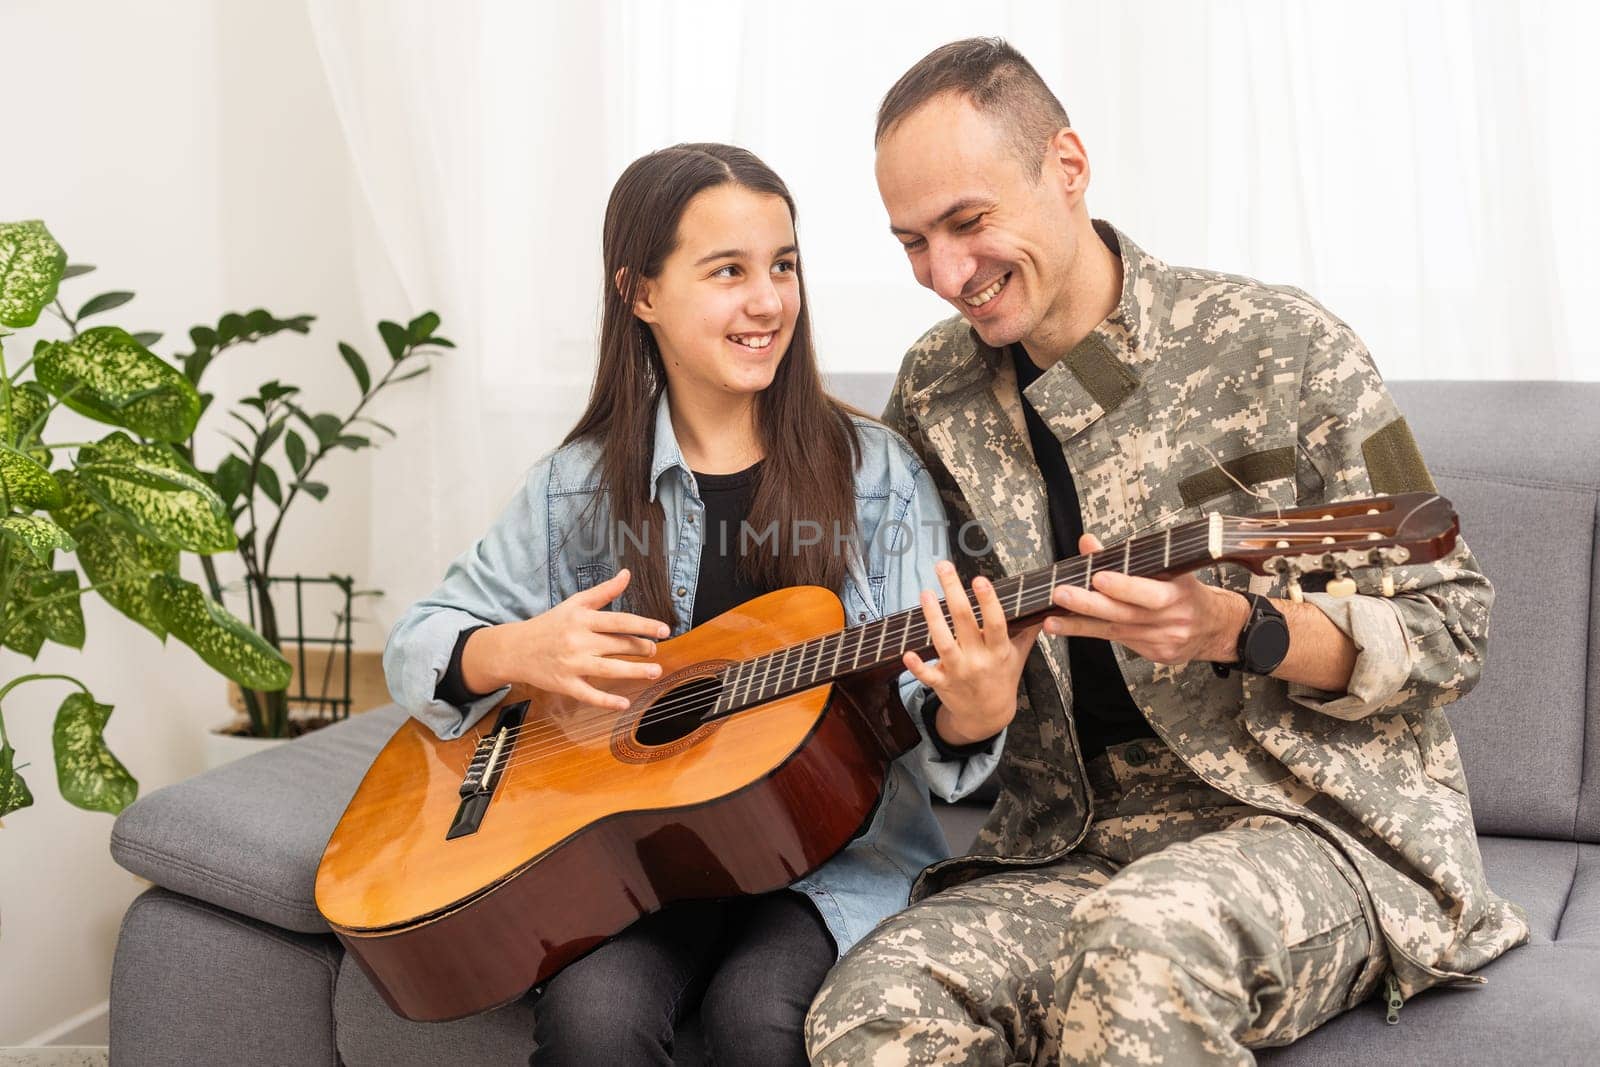 The veteran came back from army. A man in uniform with his daughter. The veteran is playing the guitar. High quality photo